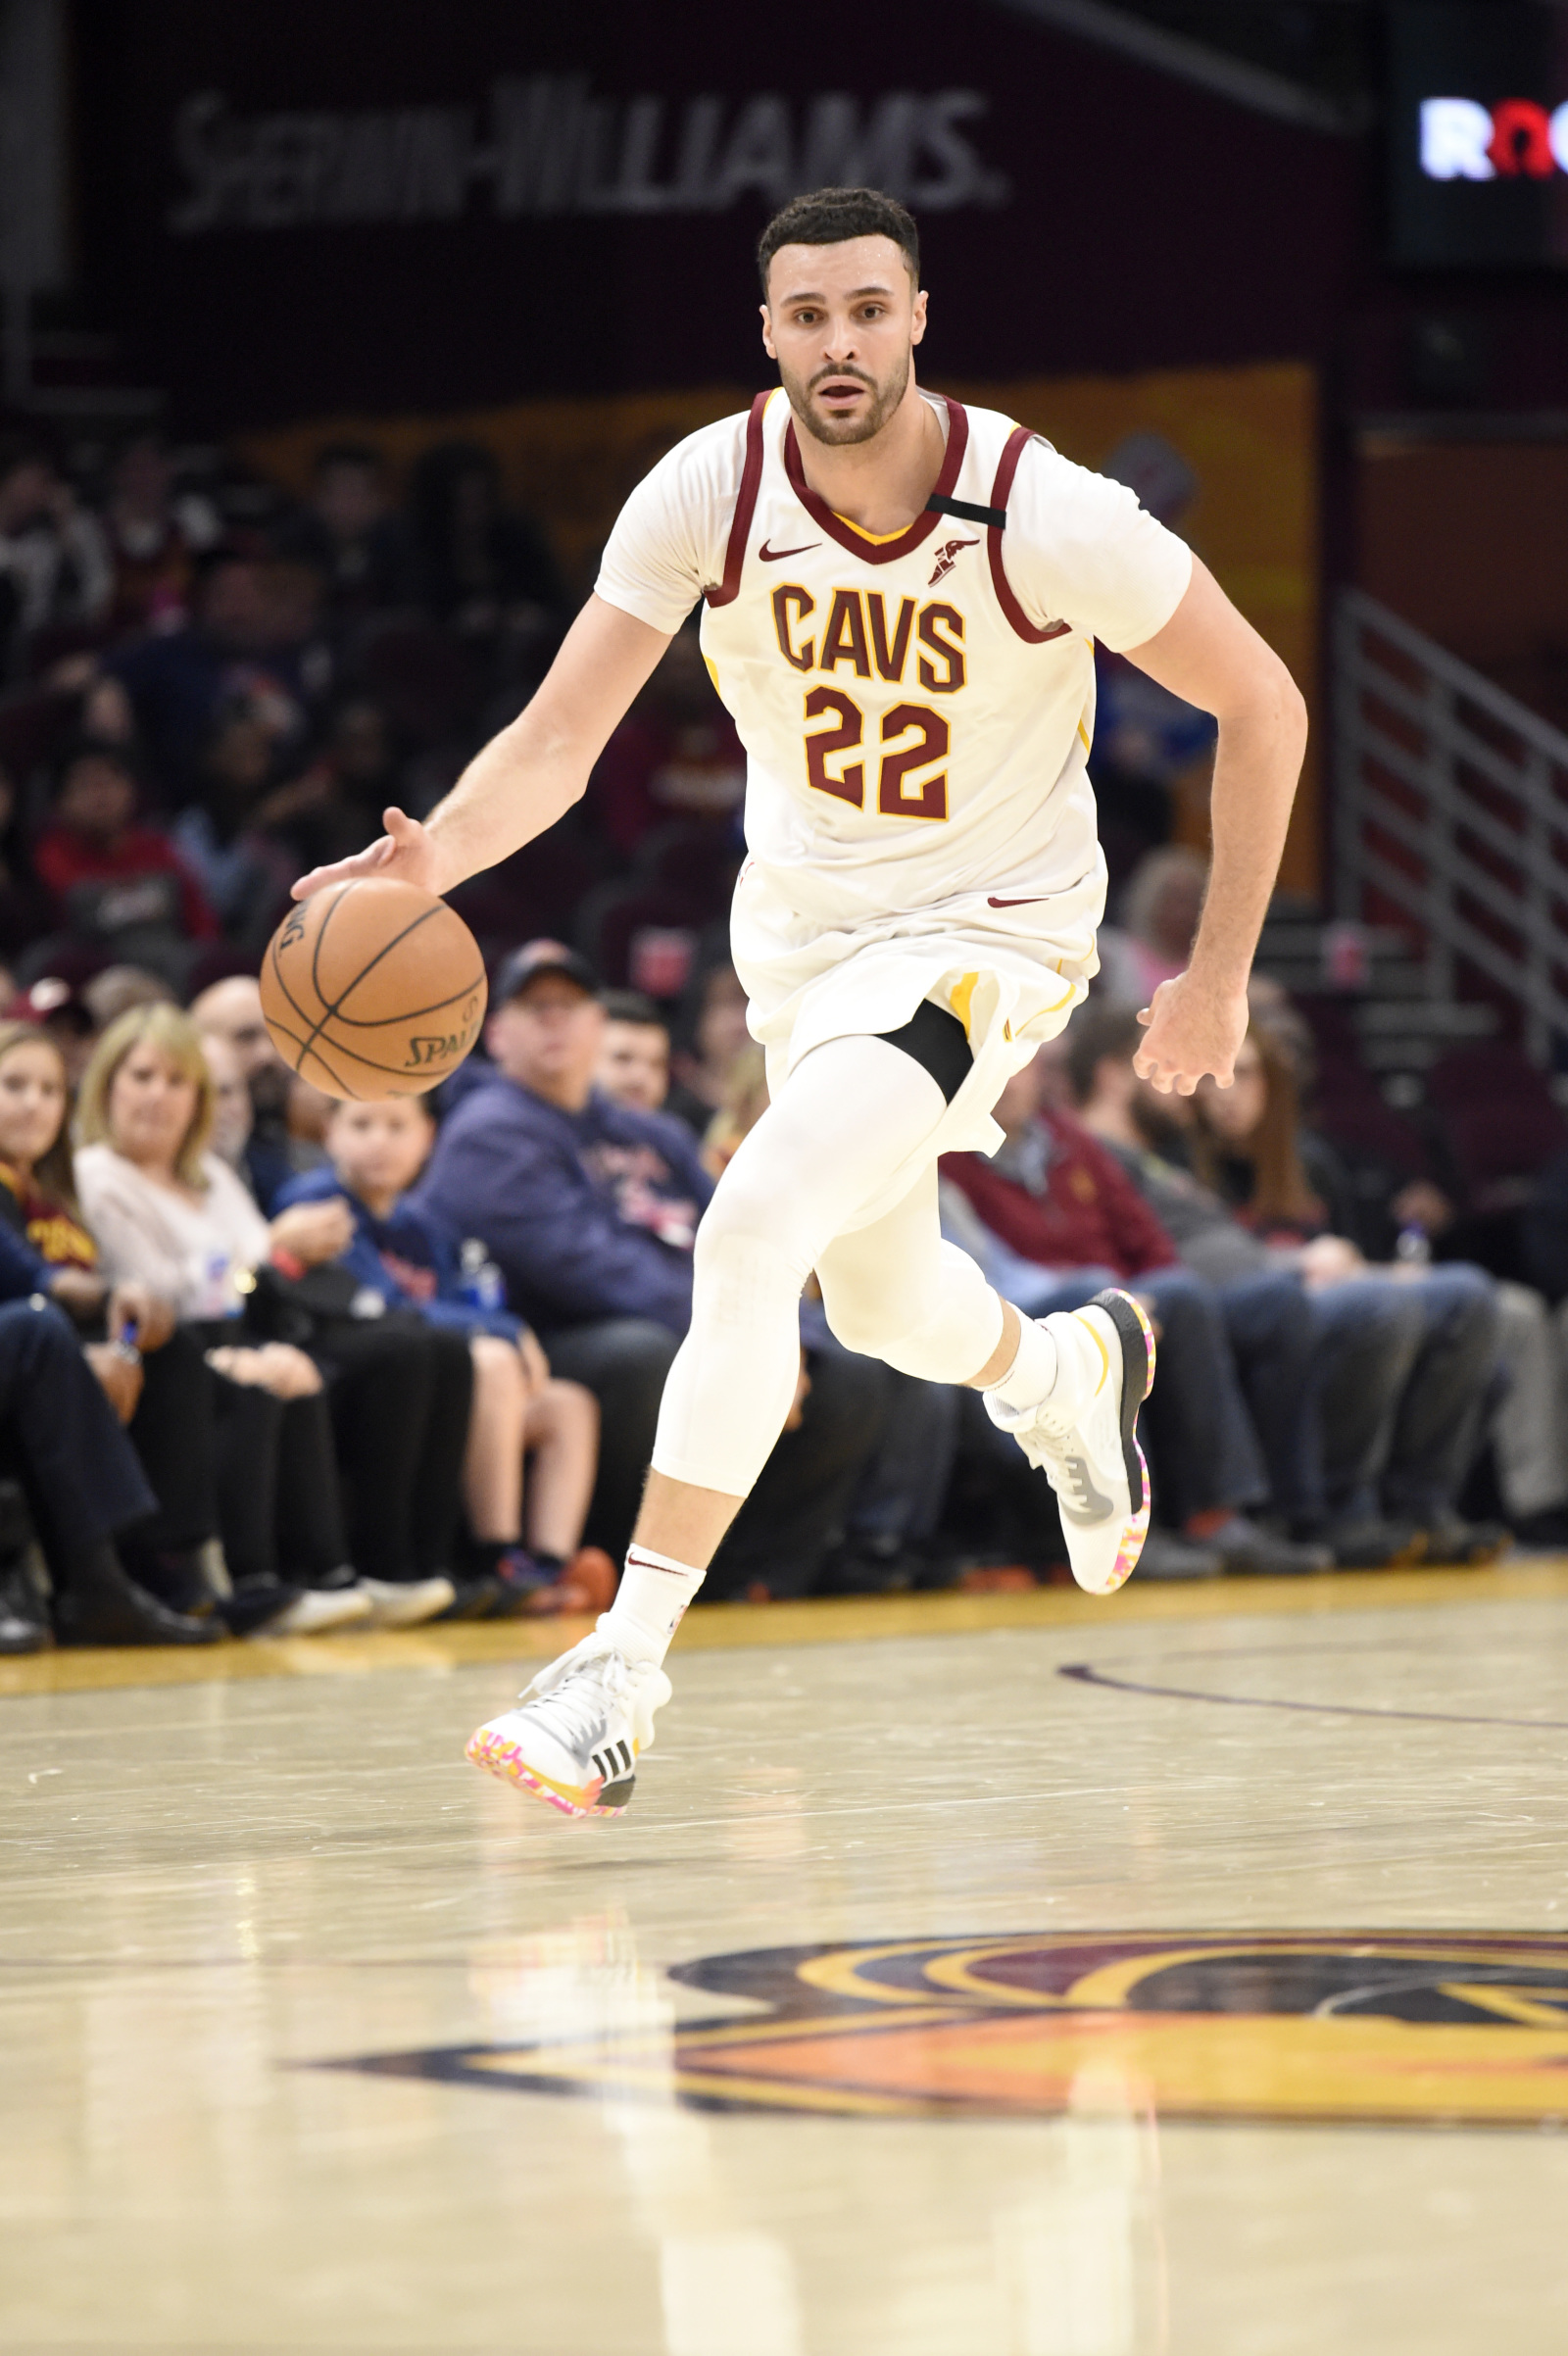 Larry Nance Jr. 'excited' to wear his dad's retired No. 22 with Cavs